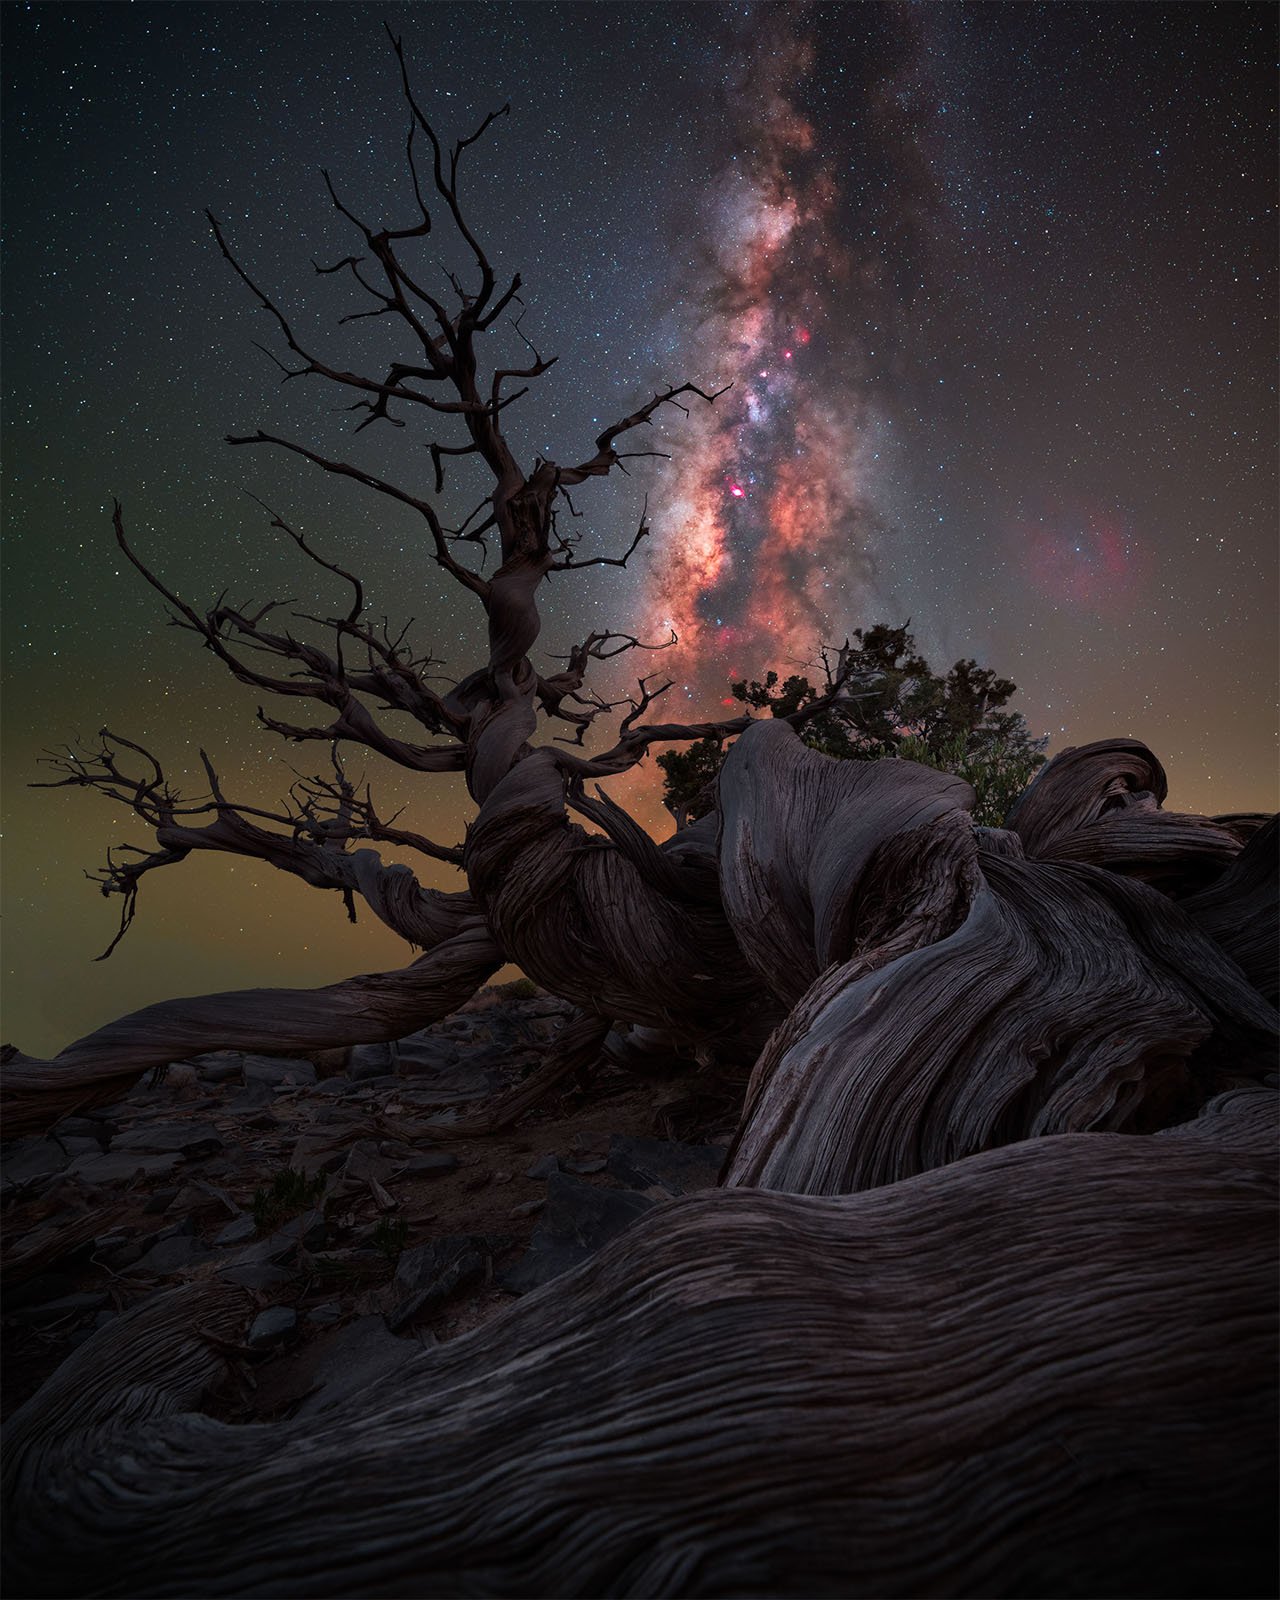  A gnarled, twisted tree stands against a backdrop of the starry night sky, with the Milky Way vividly displayed above. The tree's intricate, weathered branches create a dramatic foreground, emphasizing the vastness and beauty of the cosmos.